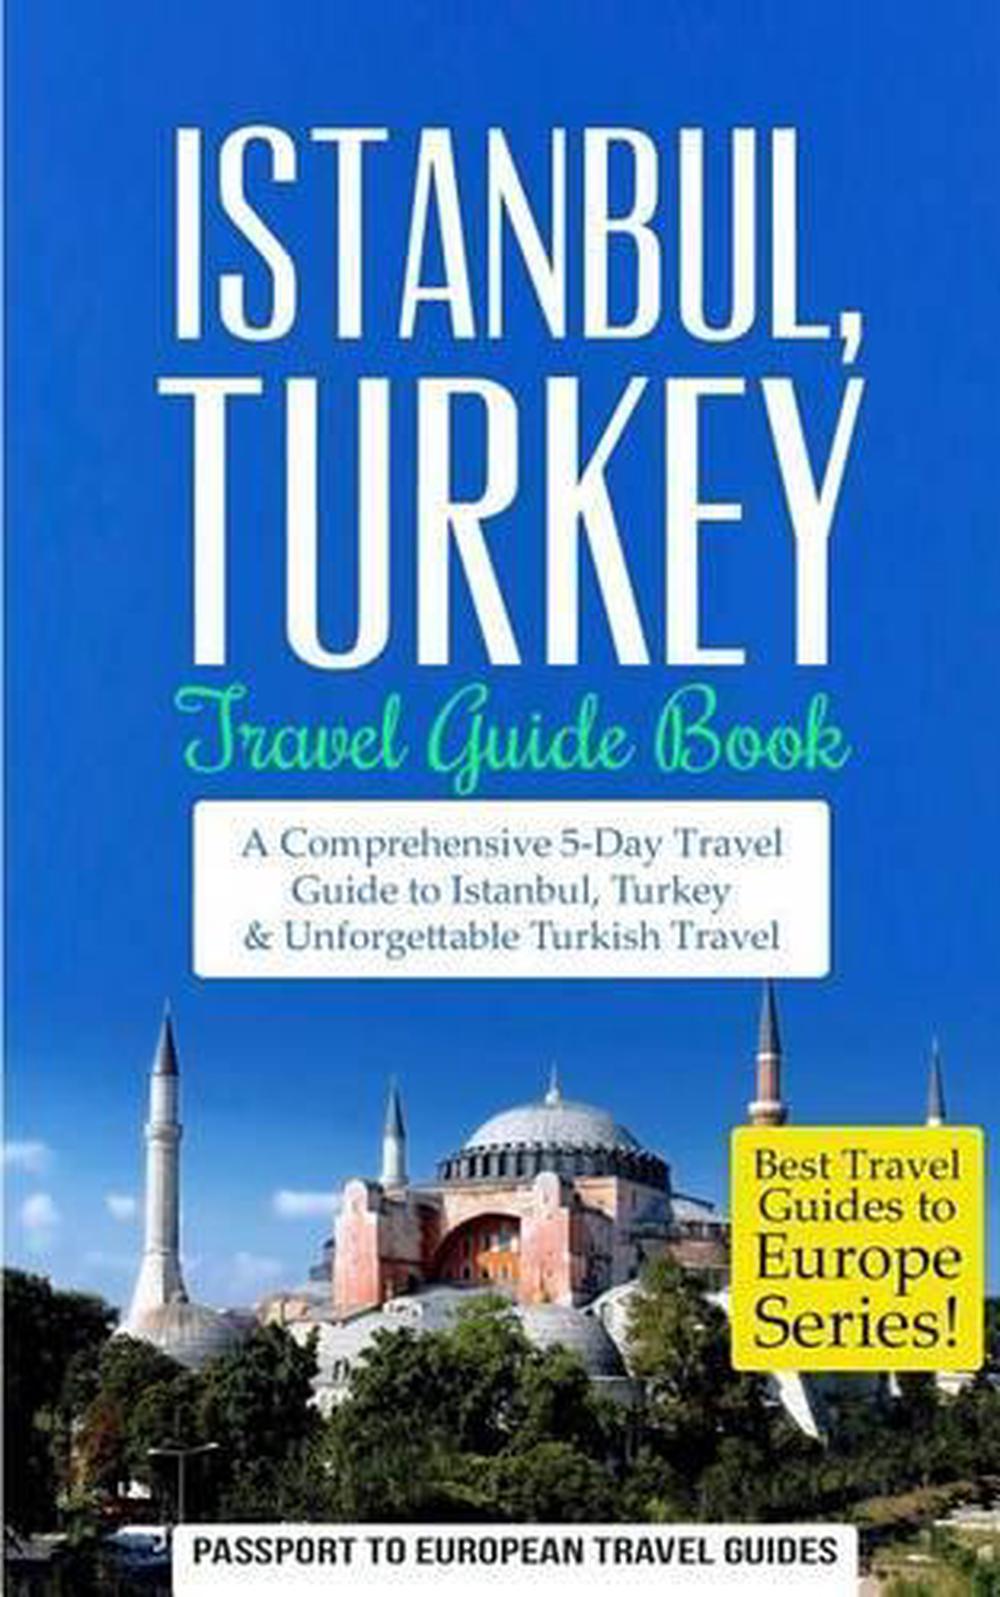 buy travel guides in istanbul